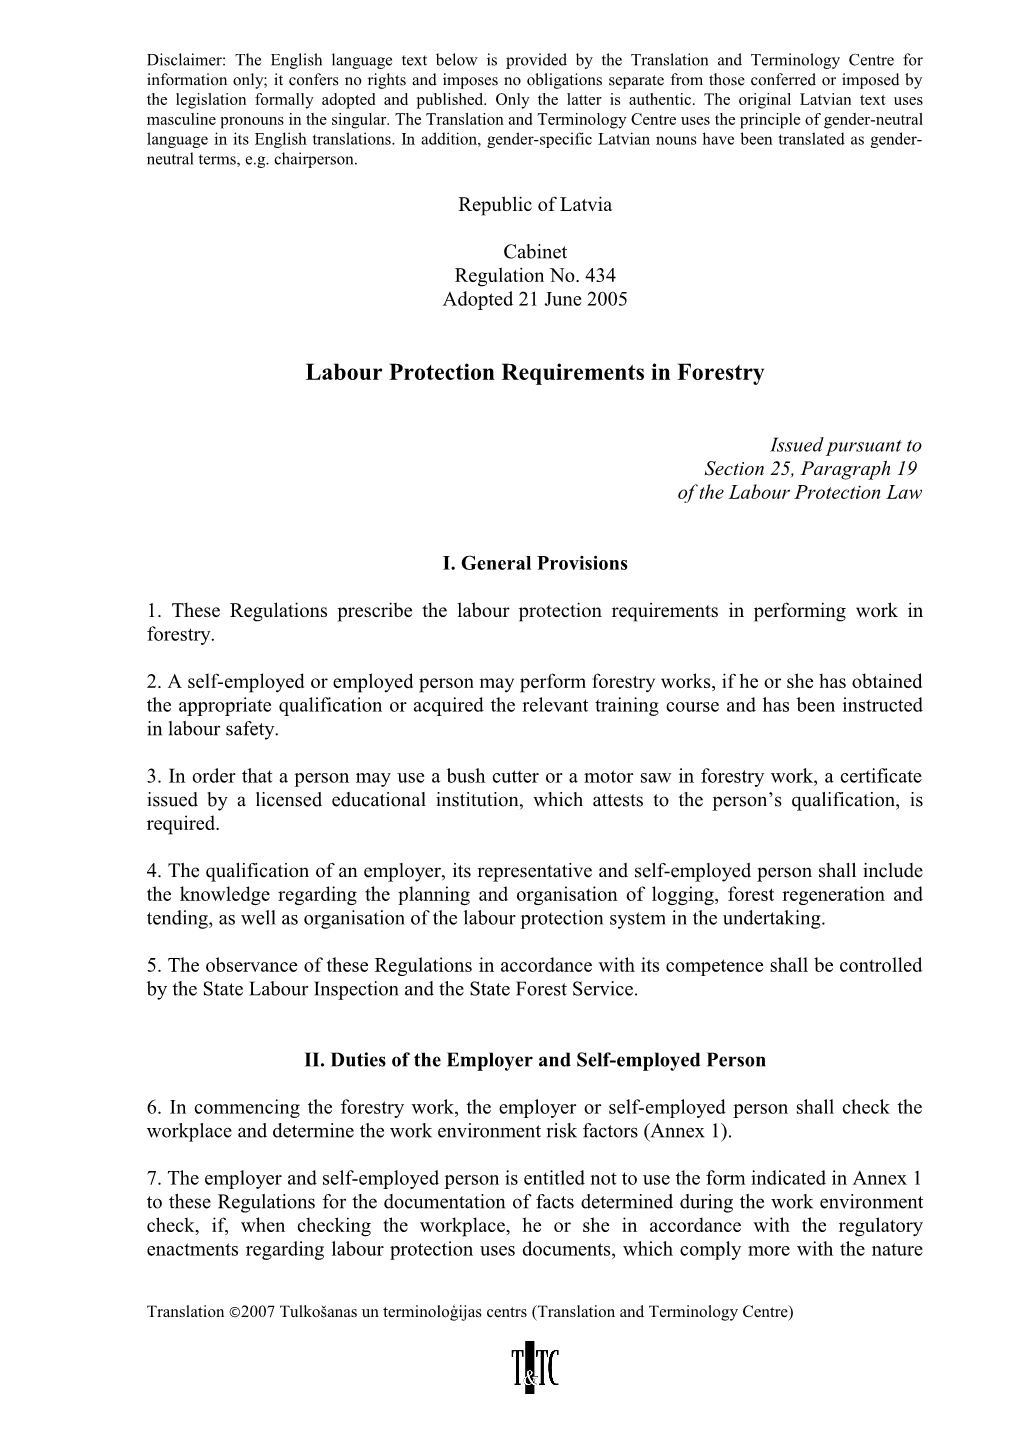 Labour Protection Requirements in Forestry